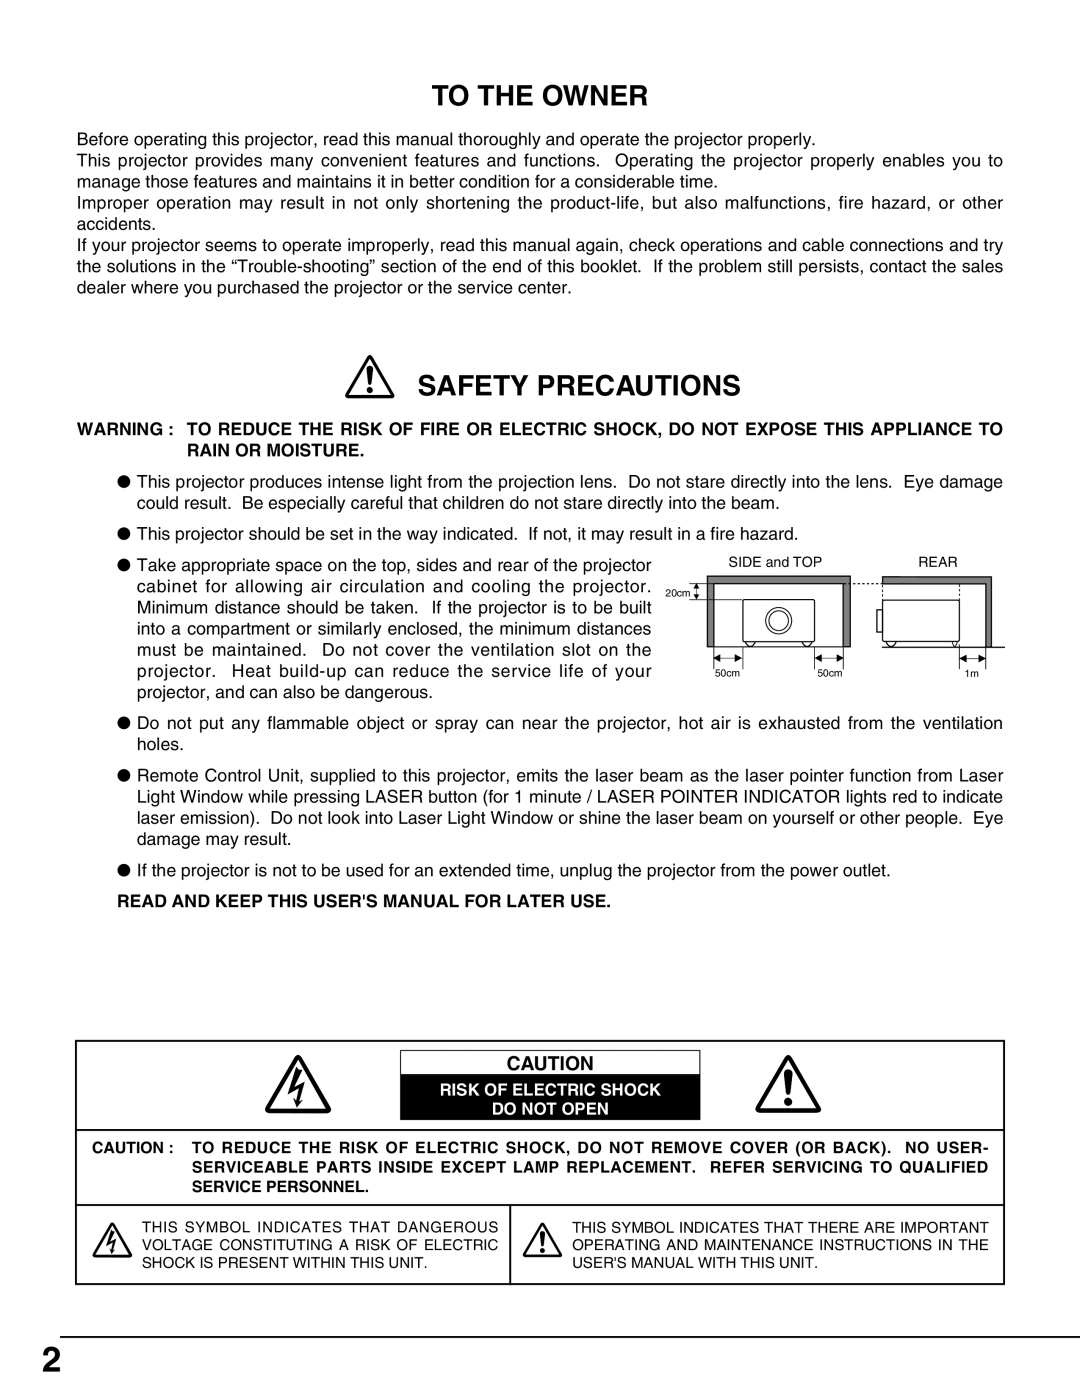 Christie Digital Systems 38-VIV302-01 To The Owner, Safety Precautions, Read And Keep This Users Manual For Later Use 